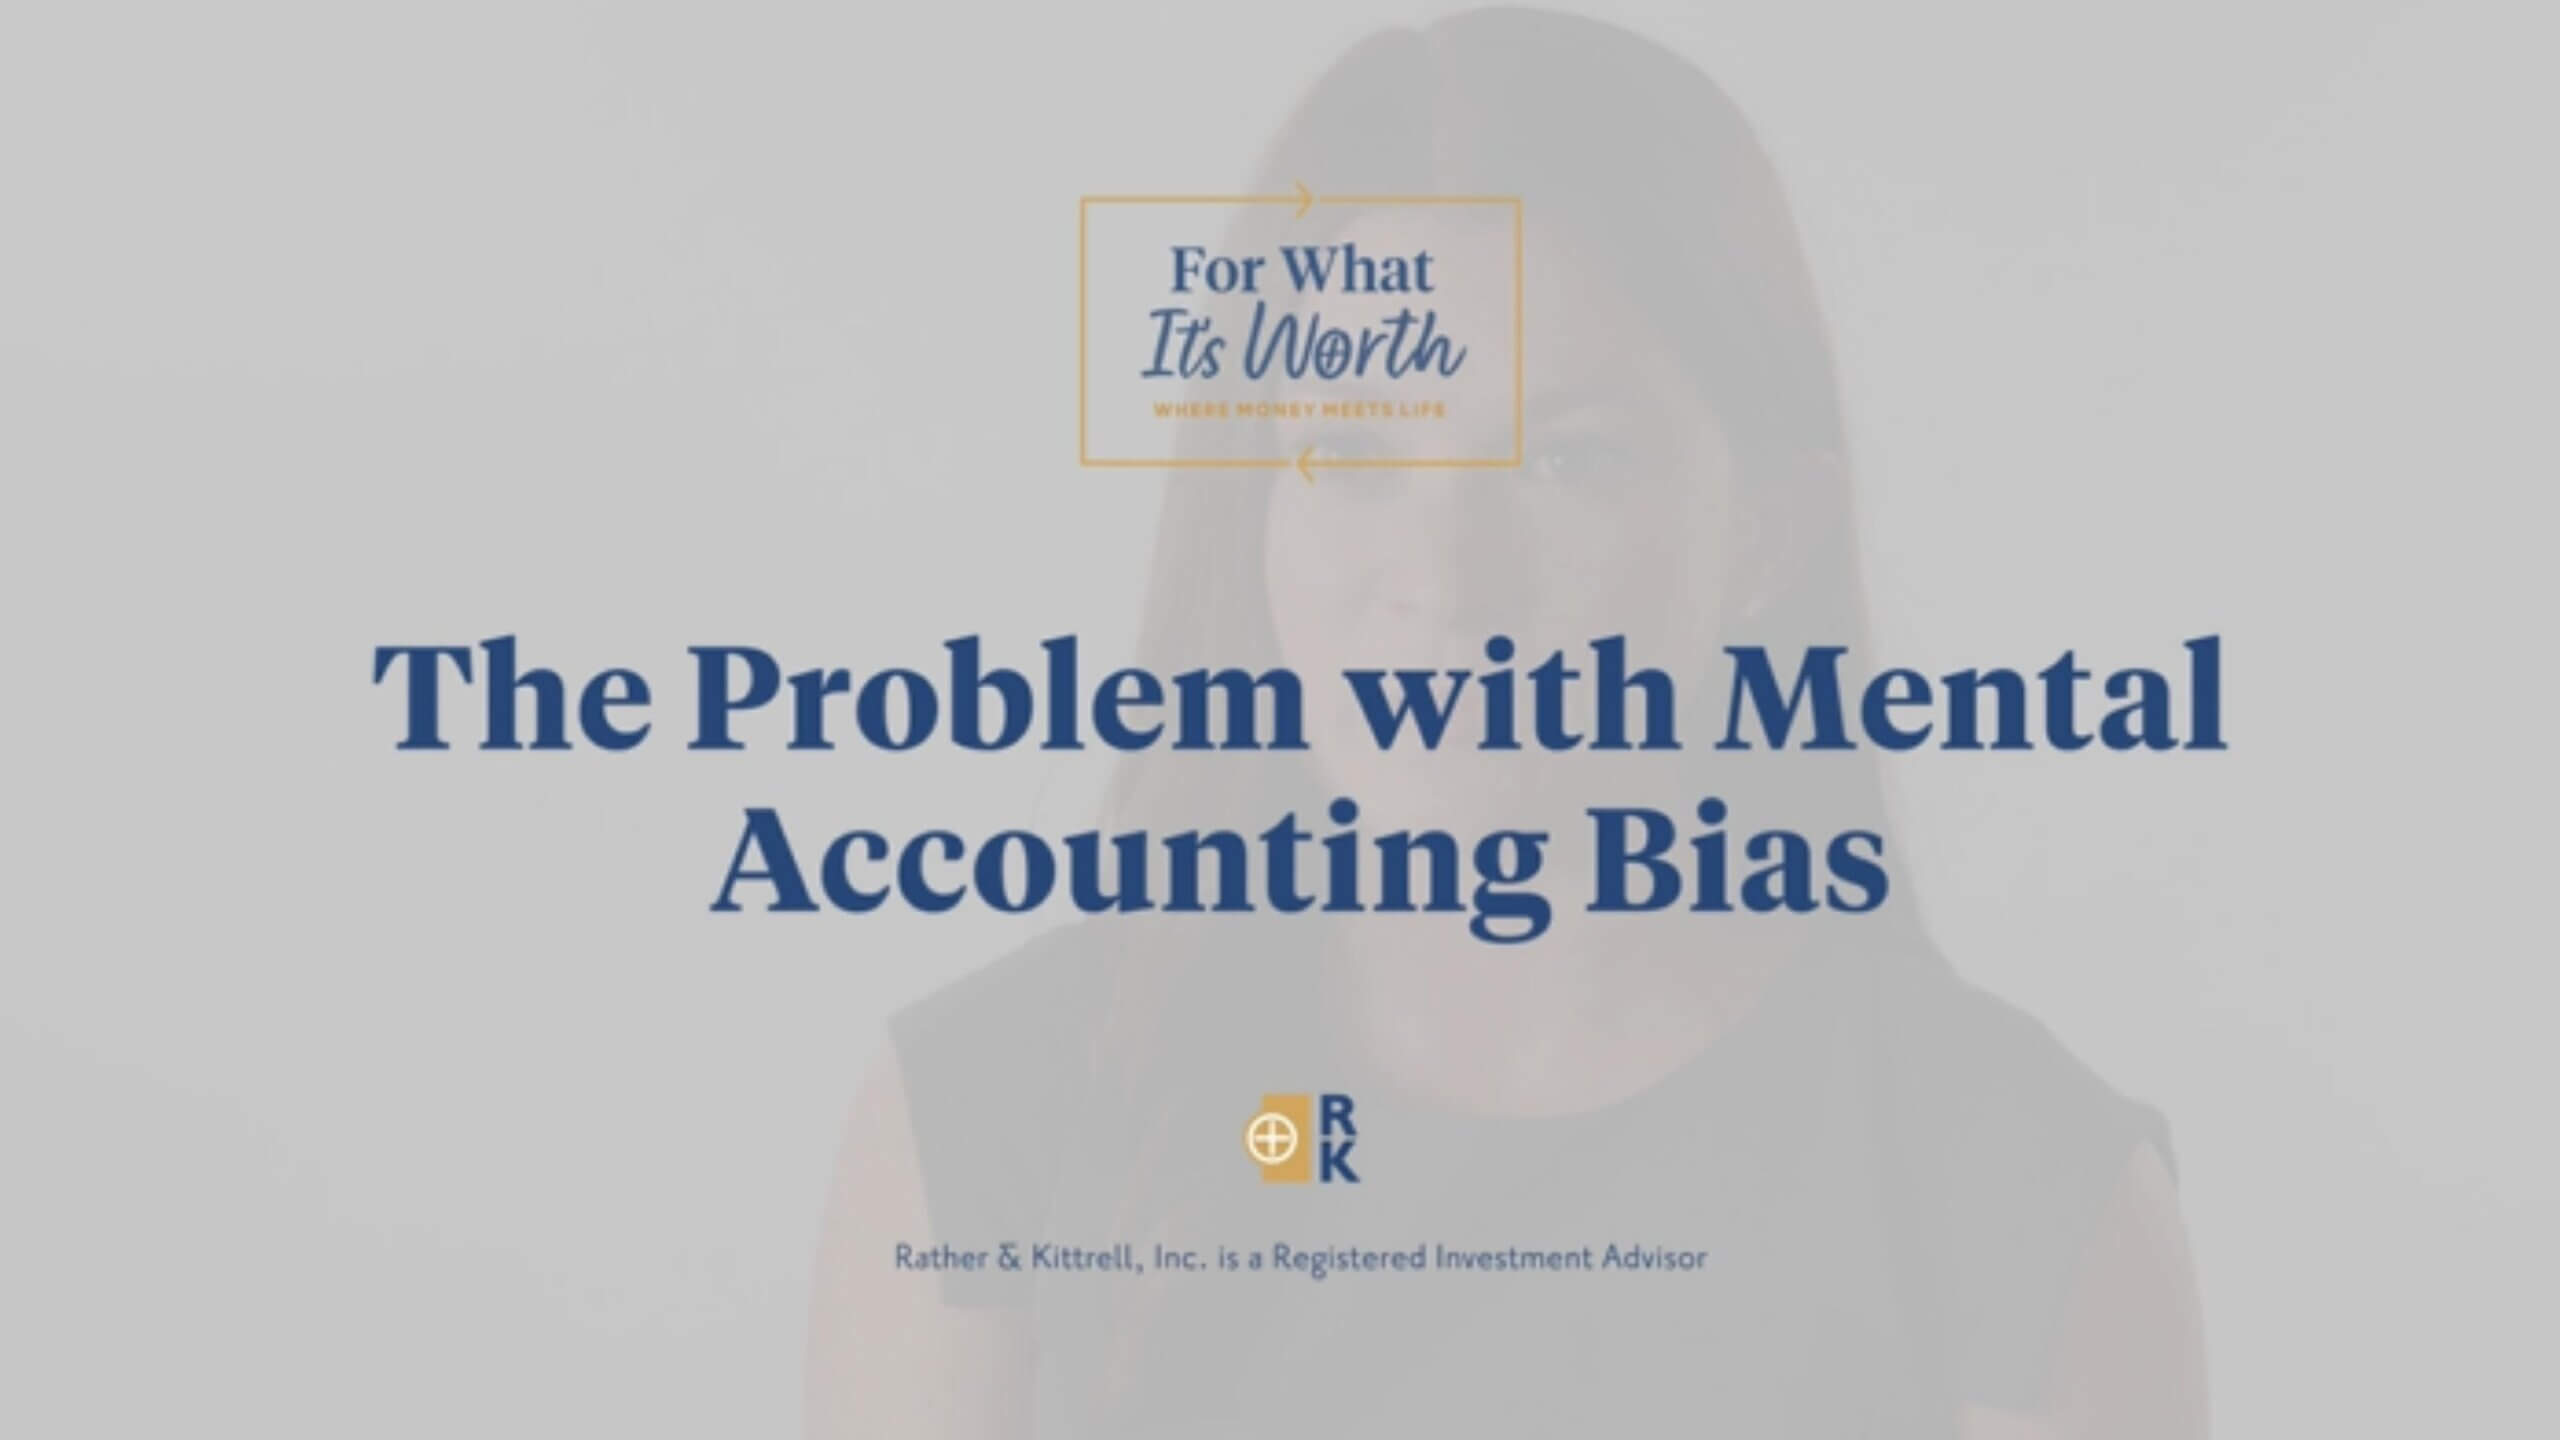 The problem with mental accounting bias